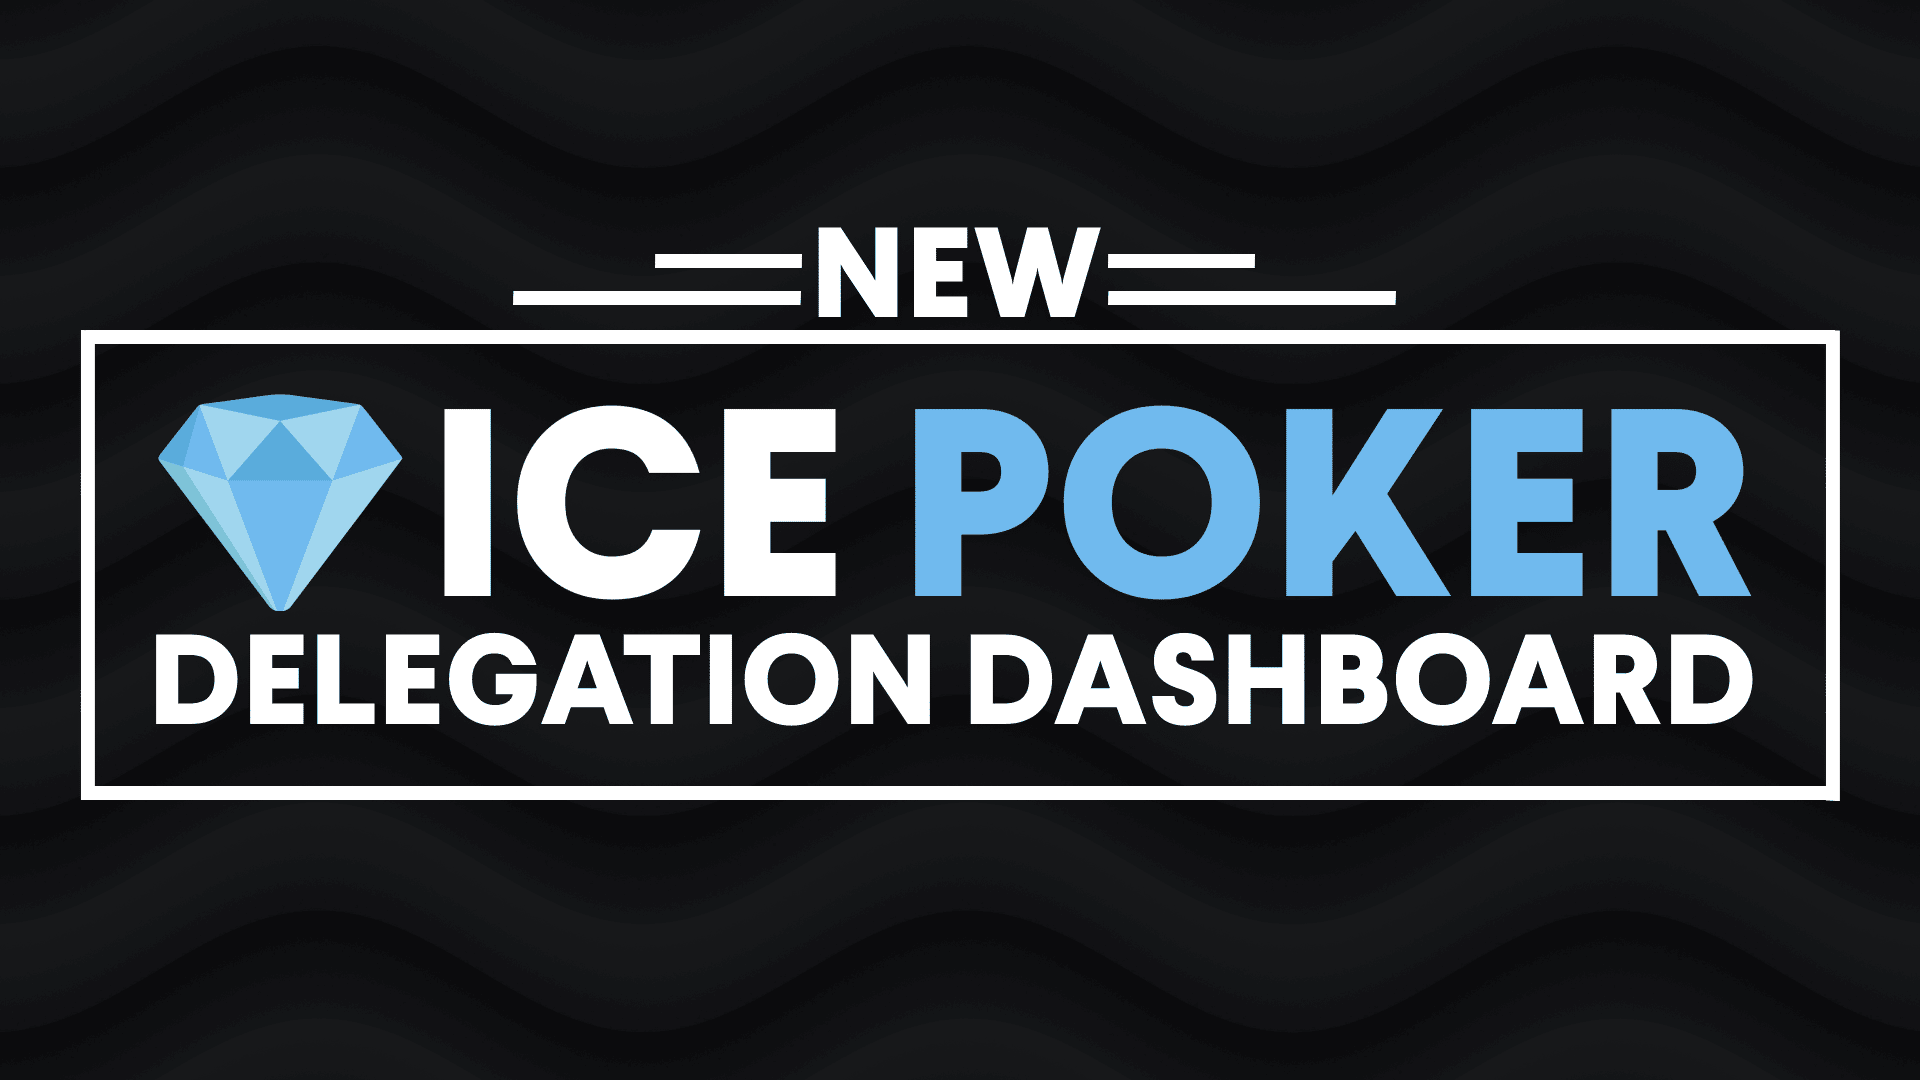 The ICE Poker Delegation Dashboard is Live!